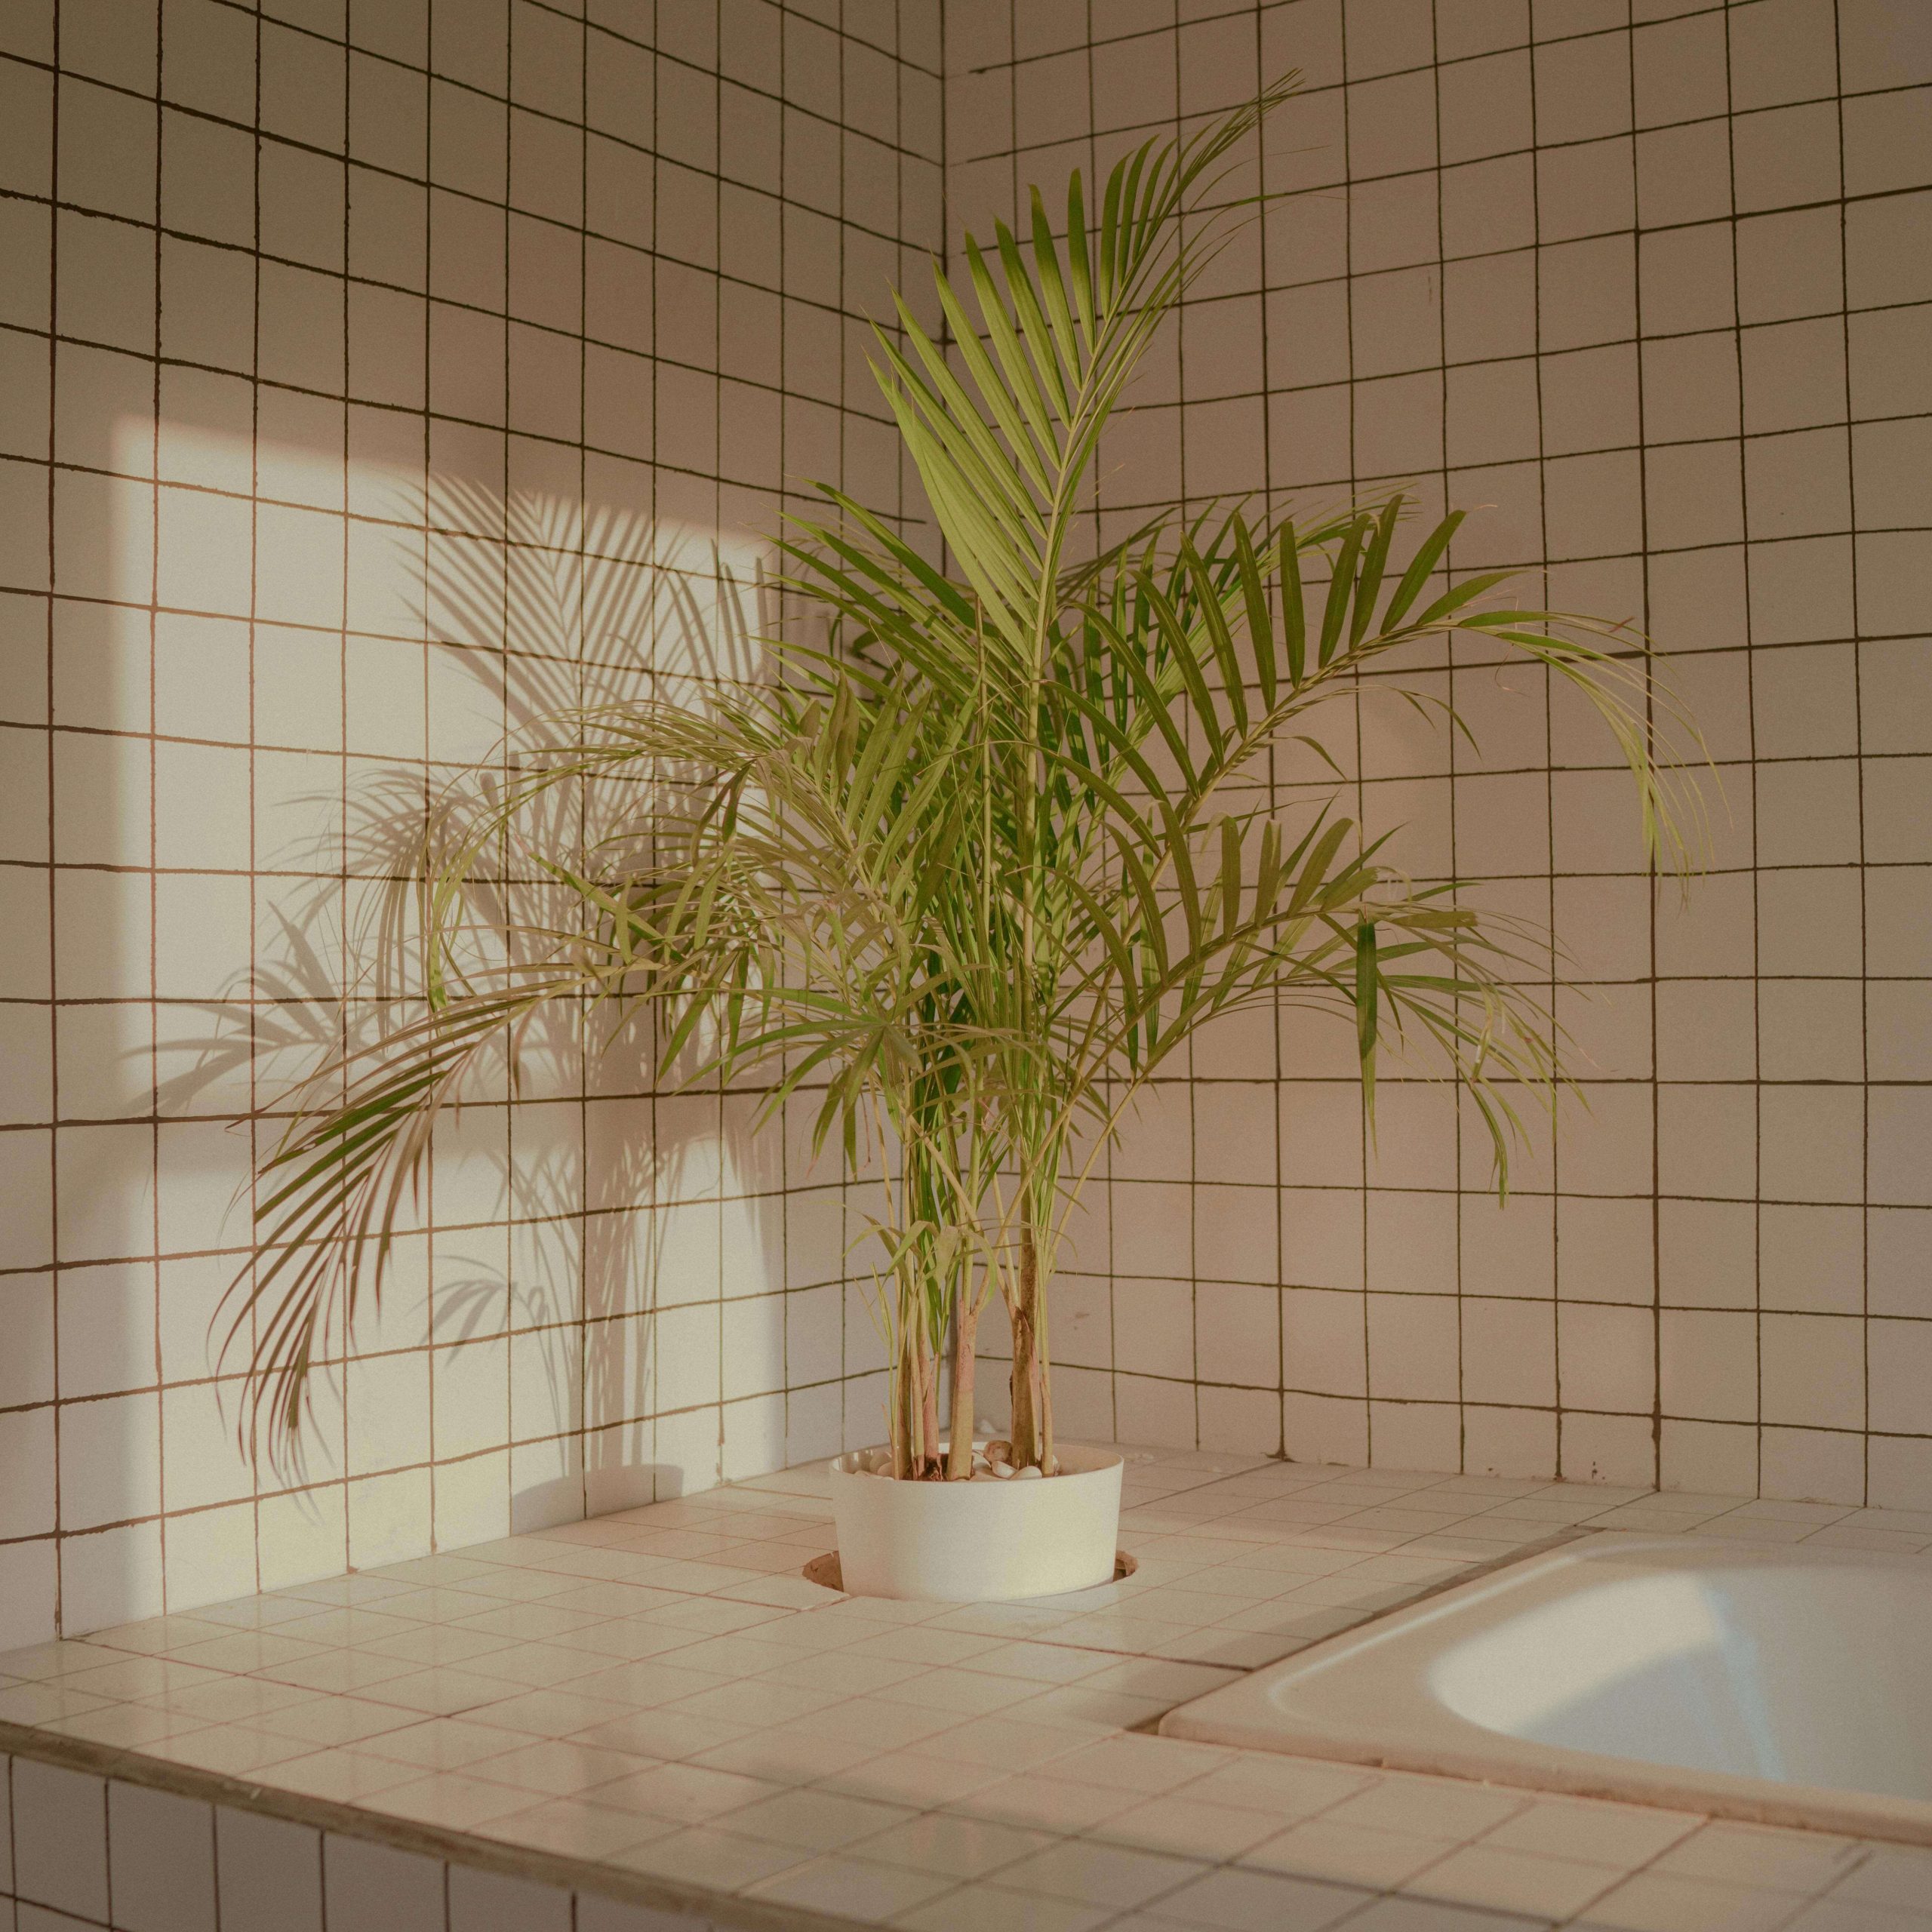 Plants that will thrive in your bathroom